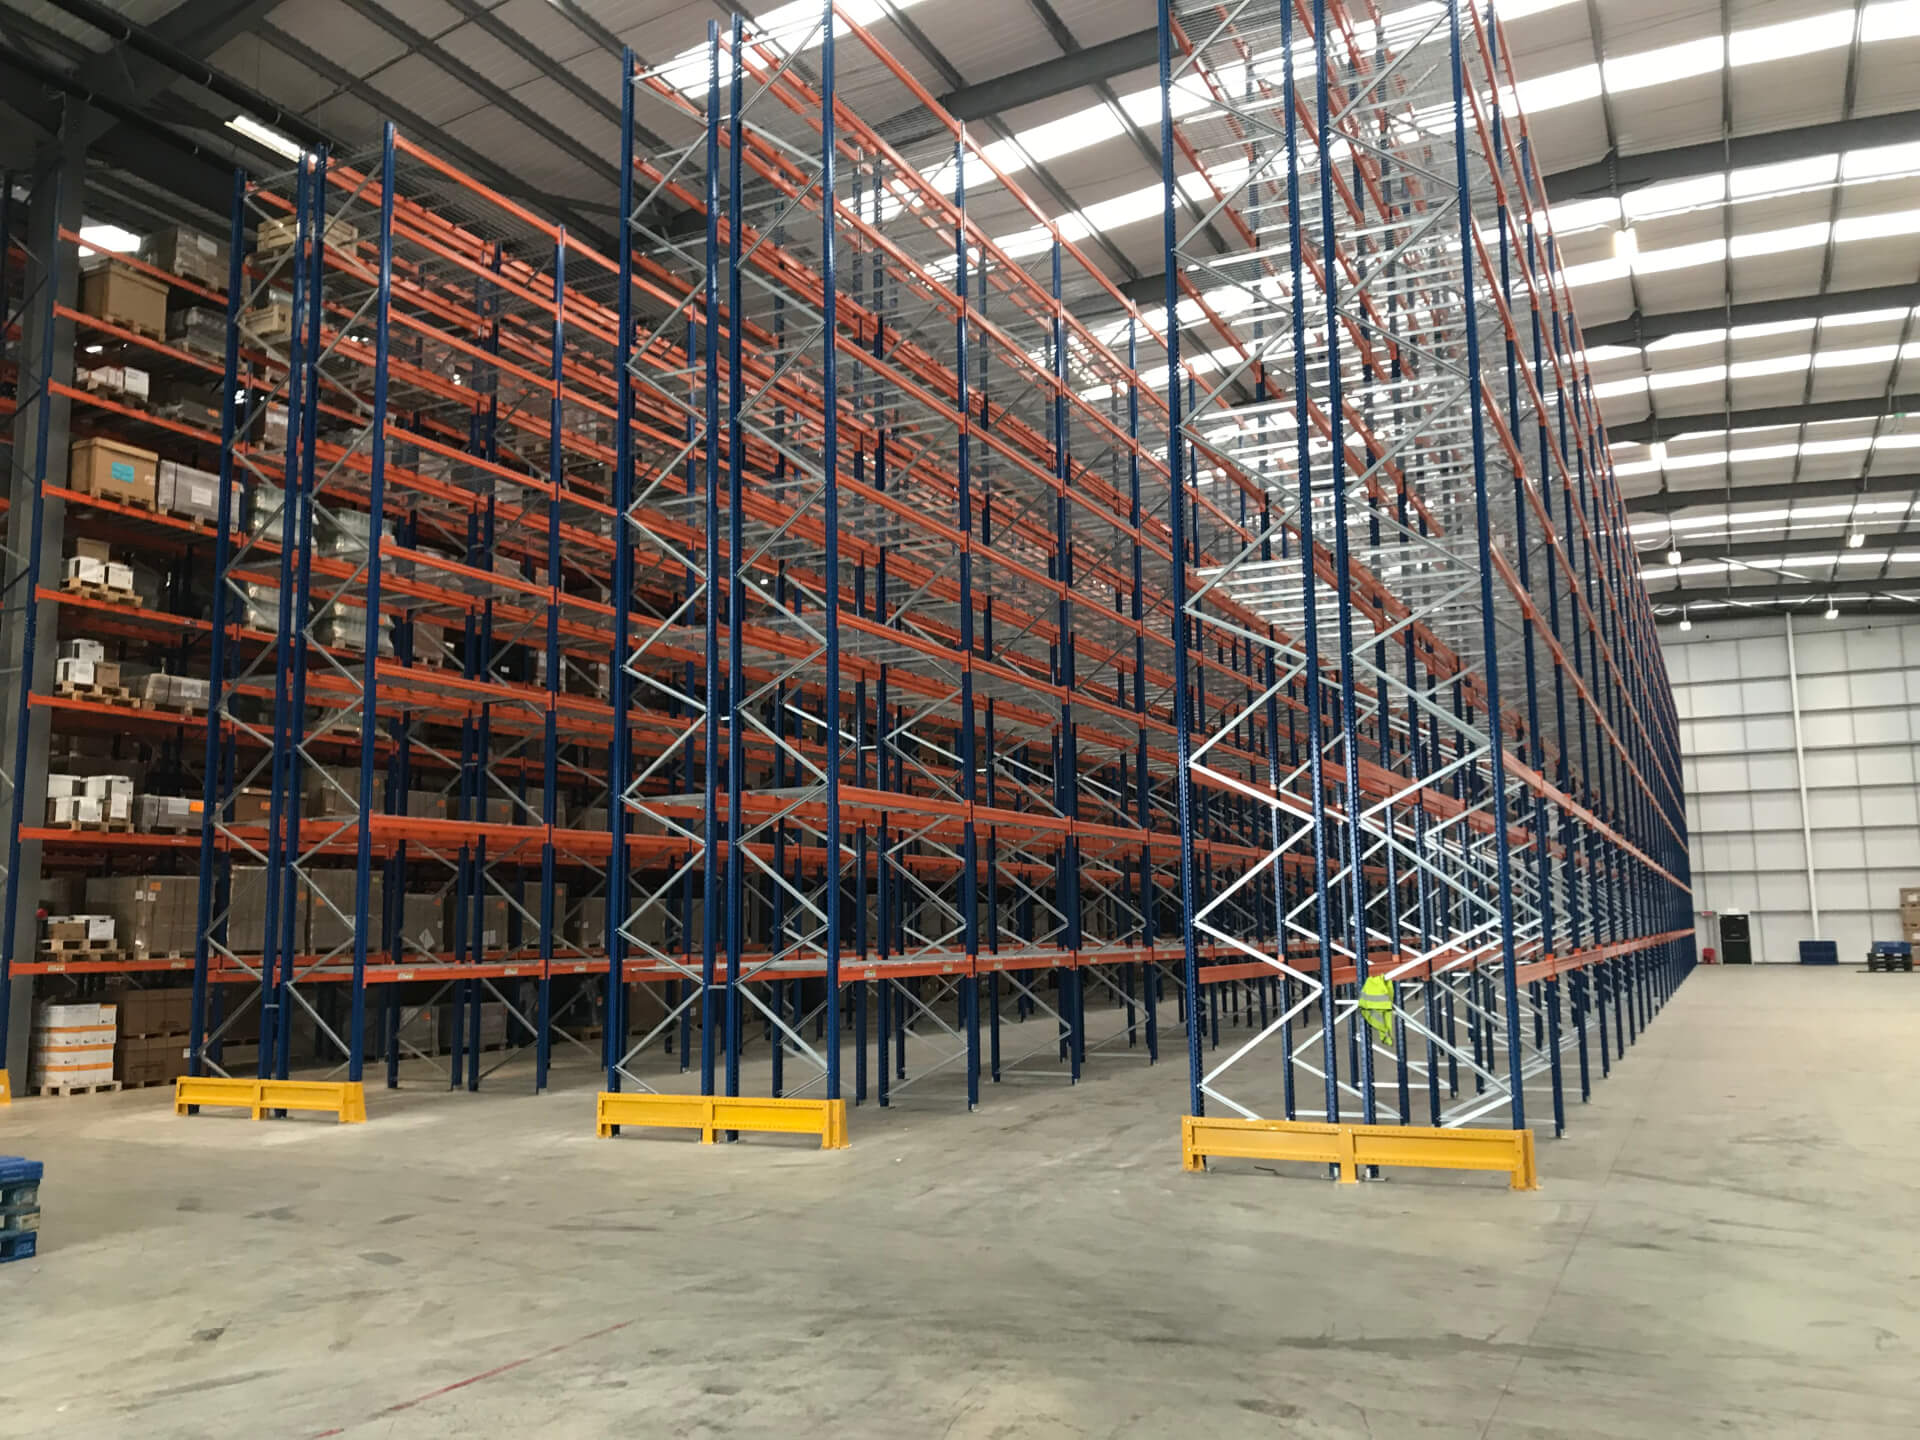  Pallet  Racking  Design  and Layout  l Advanced Handling 